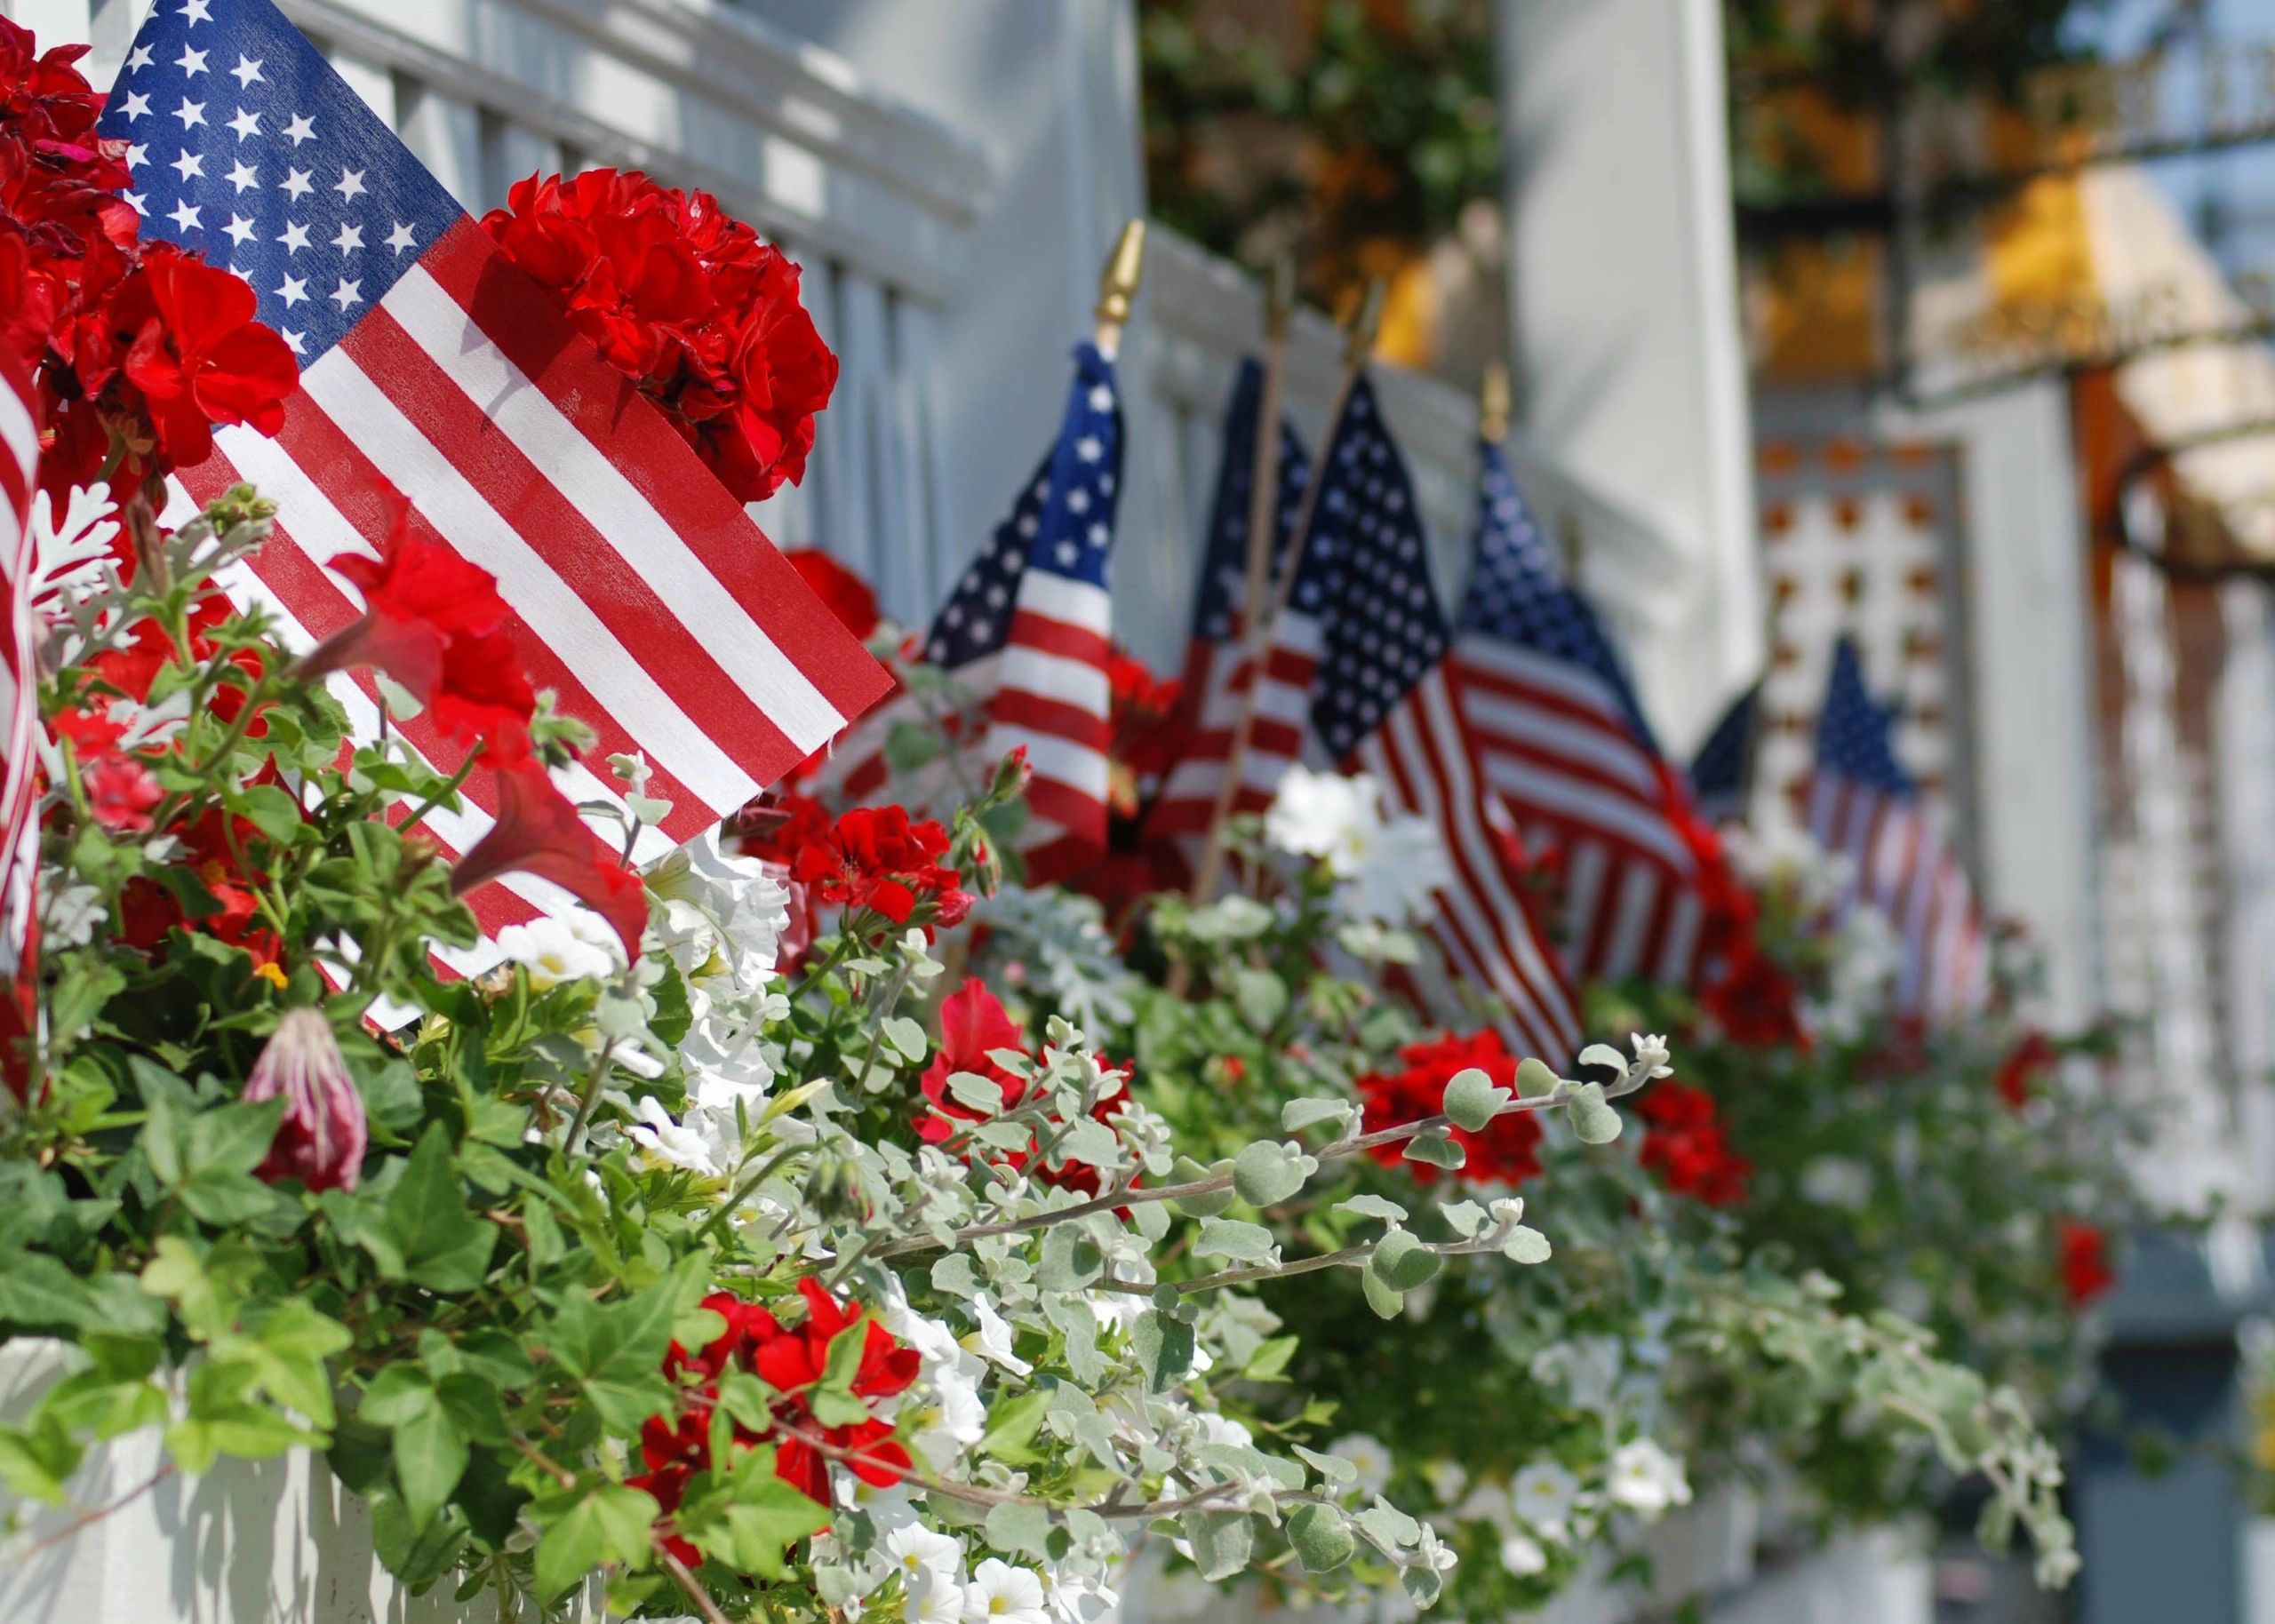 White front porch with flower boxes holding red and white flowers in addition to American flags.